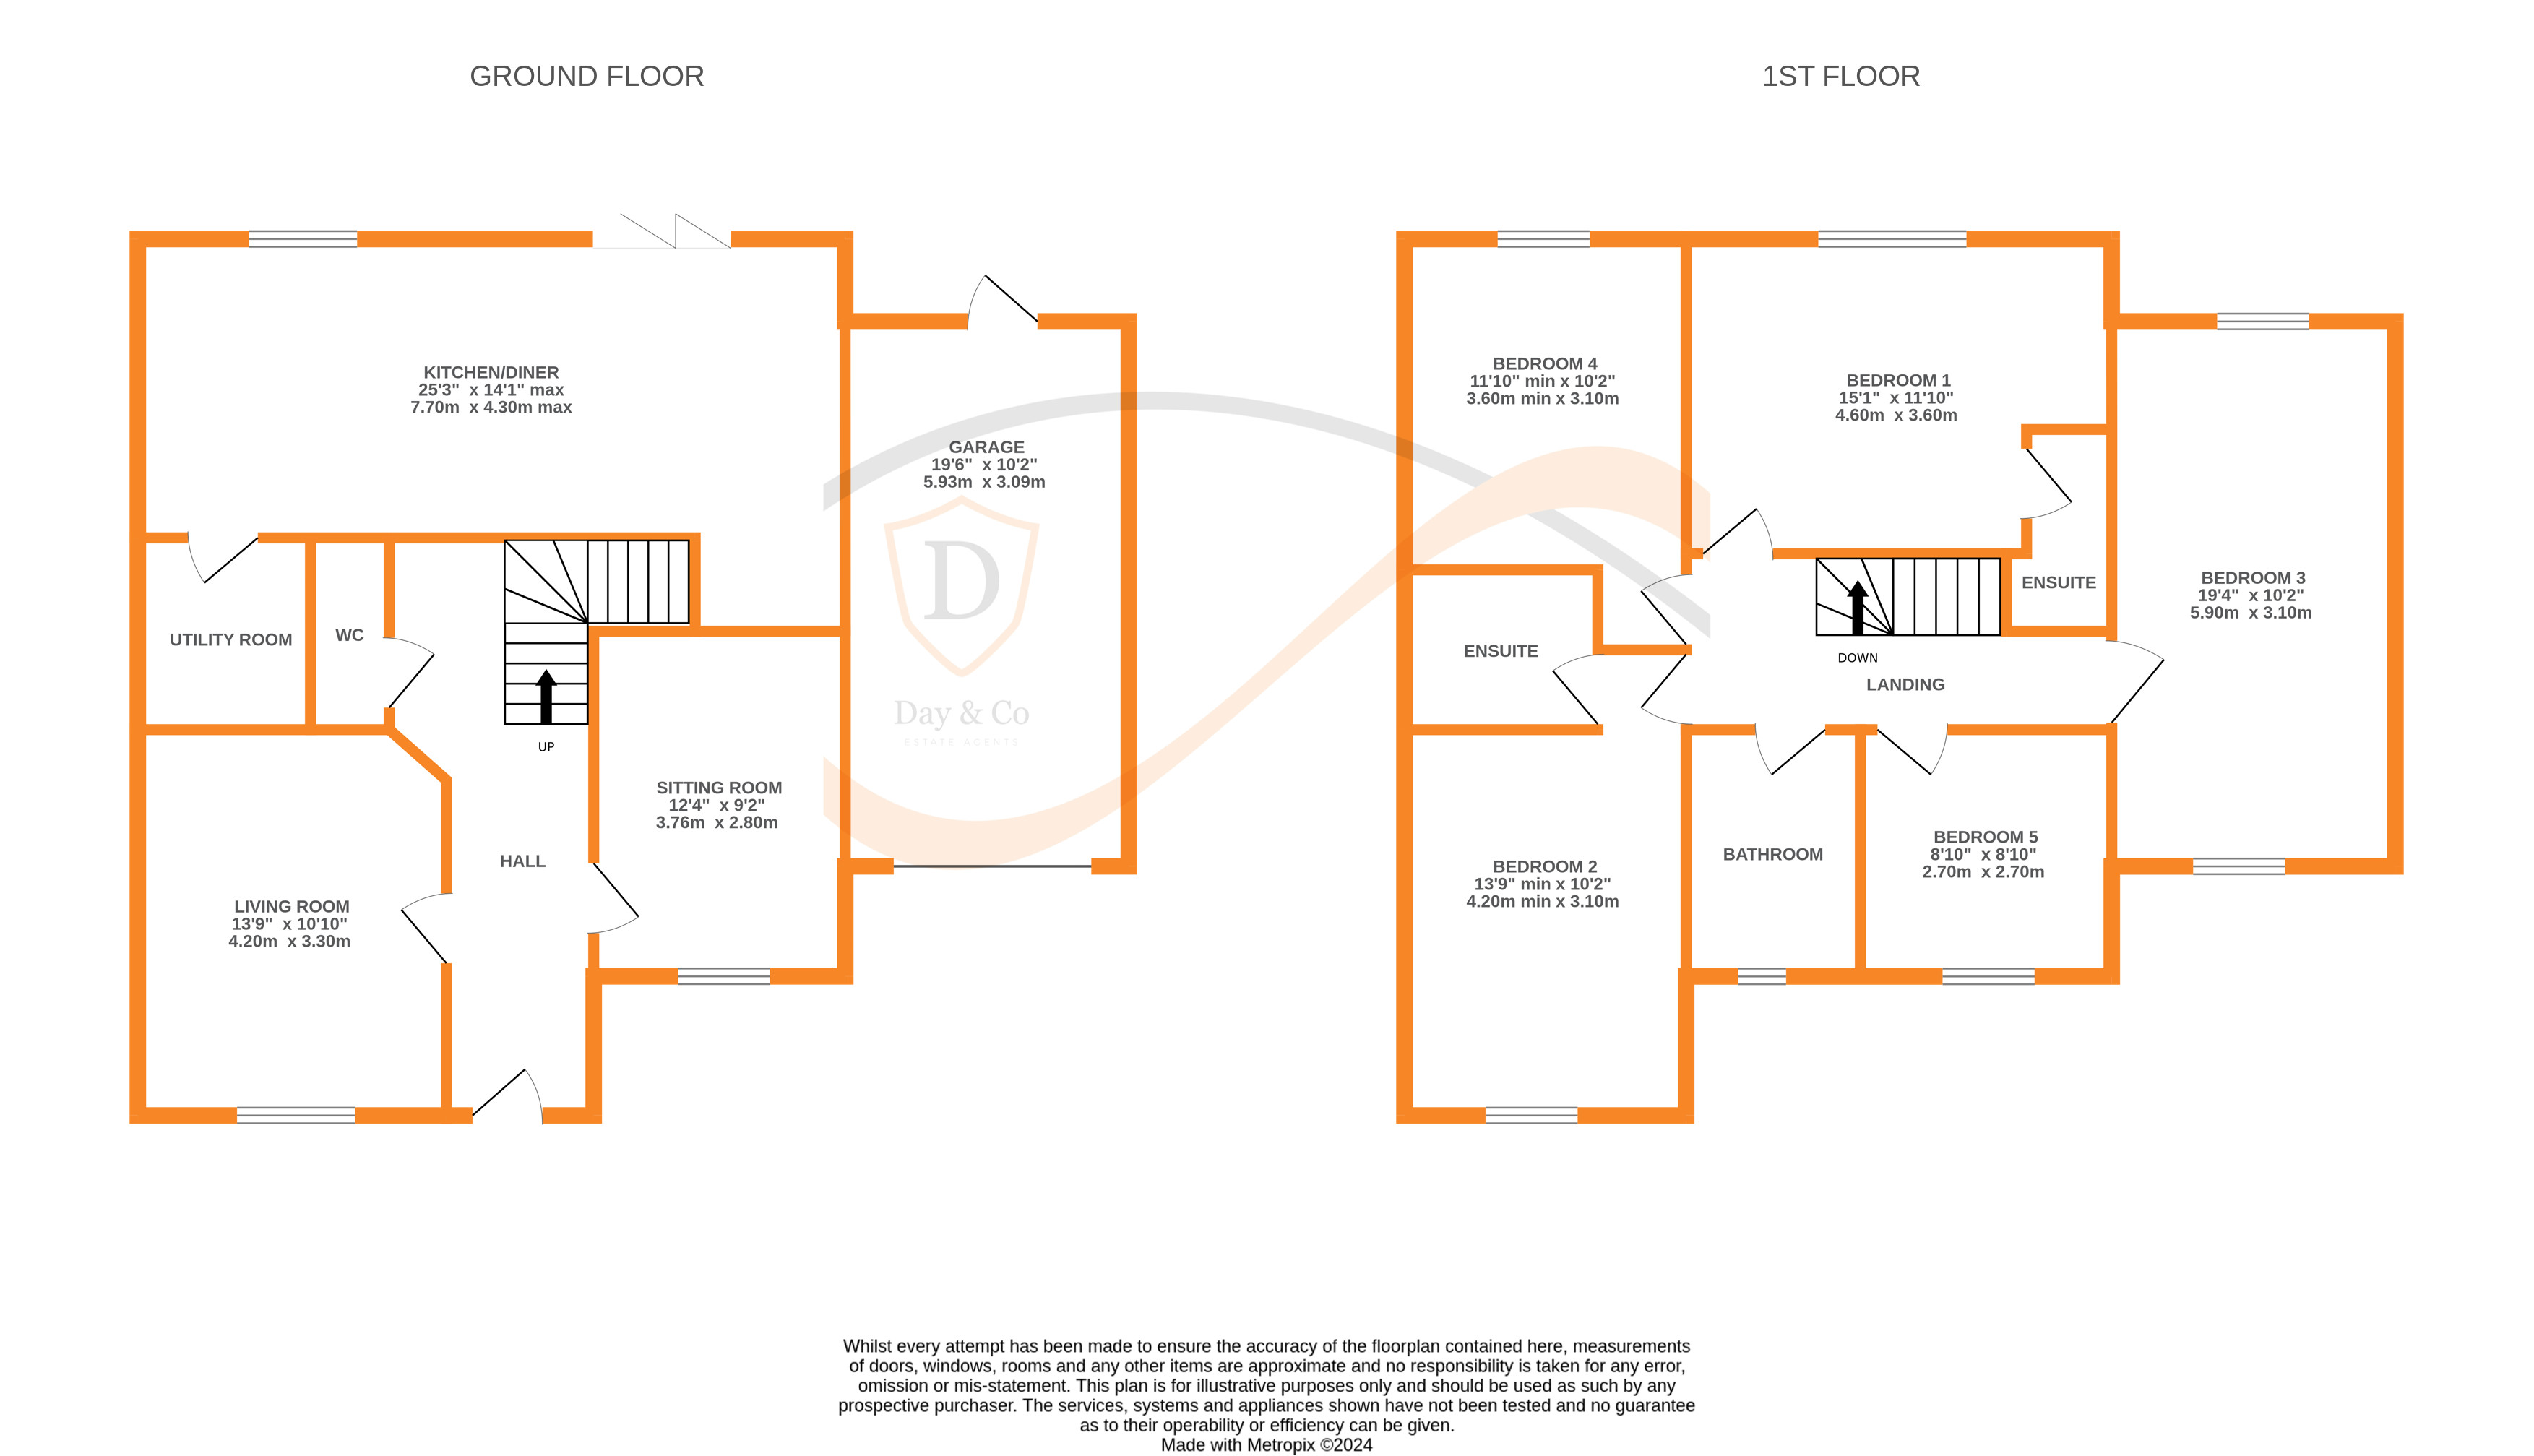 Floorplans For Long Lee, Keighley, West Yorkshire